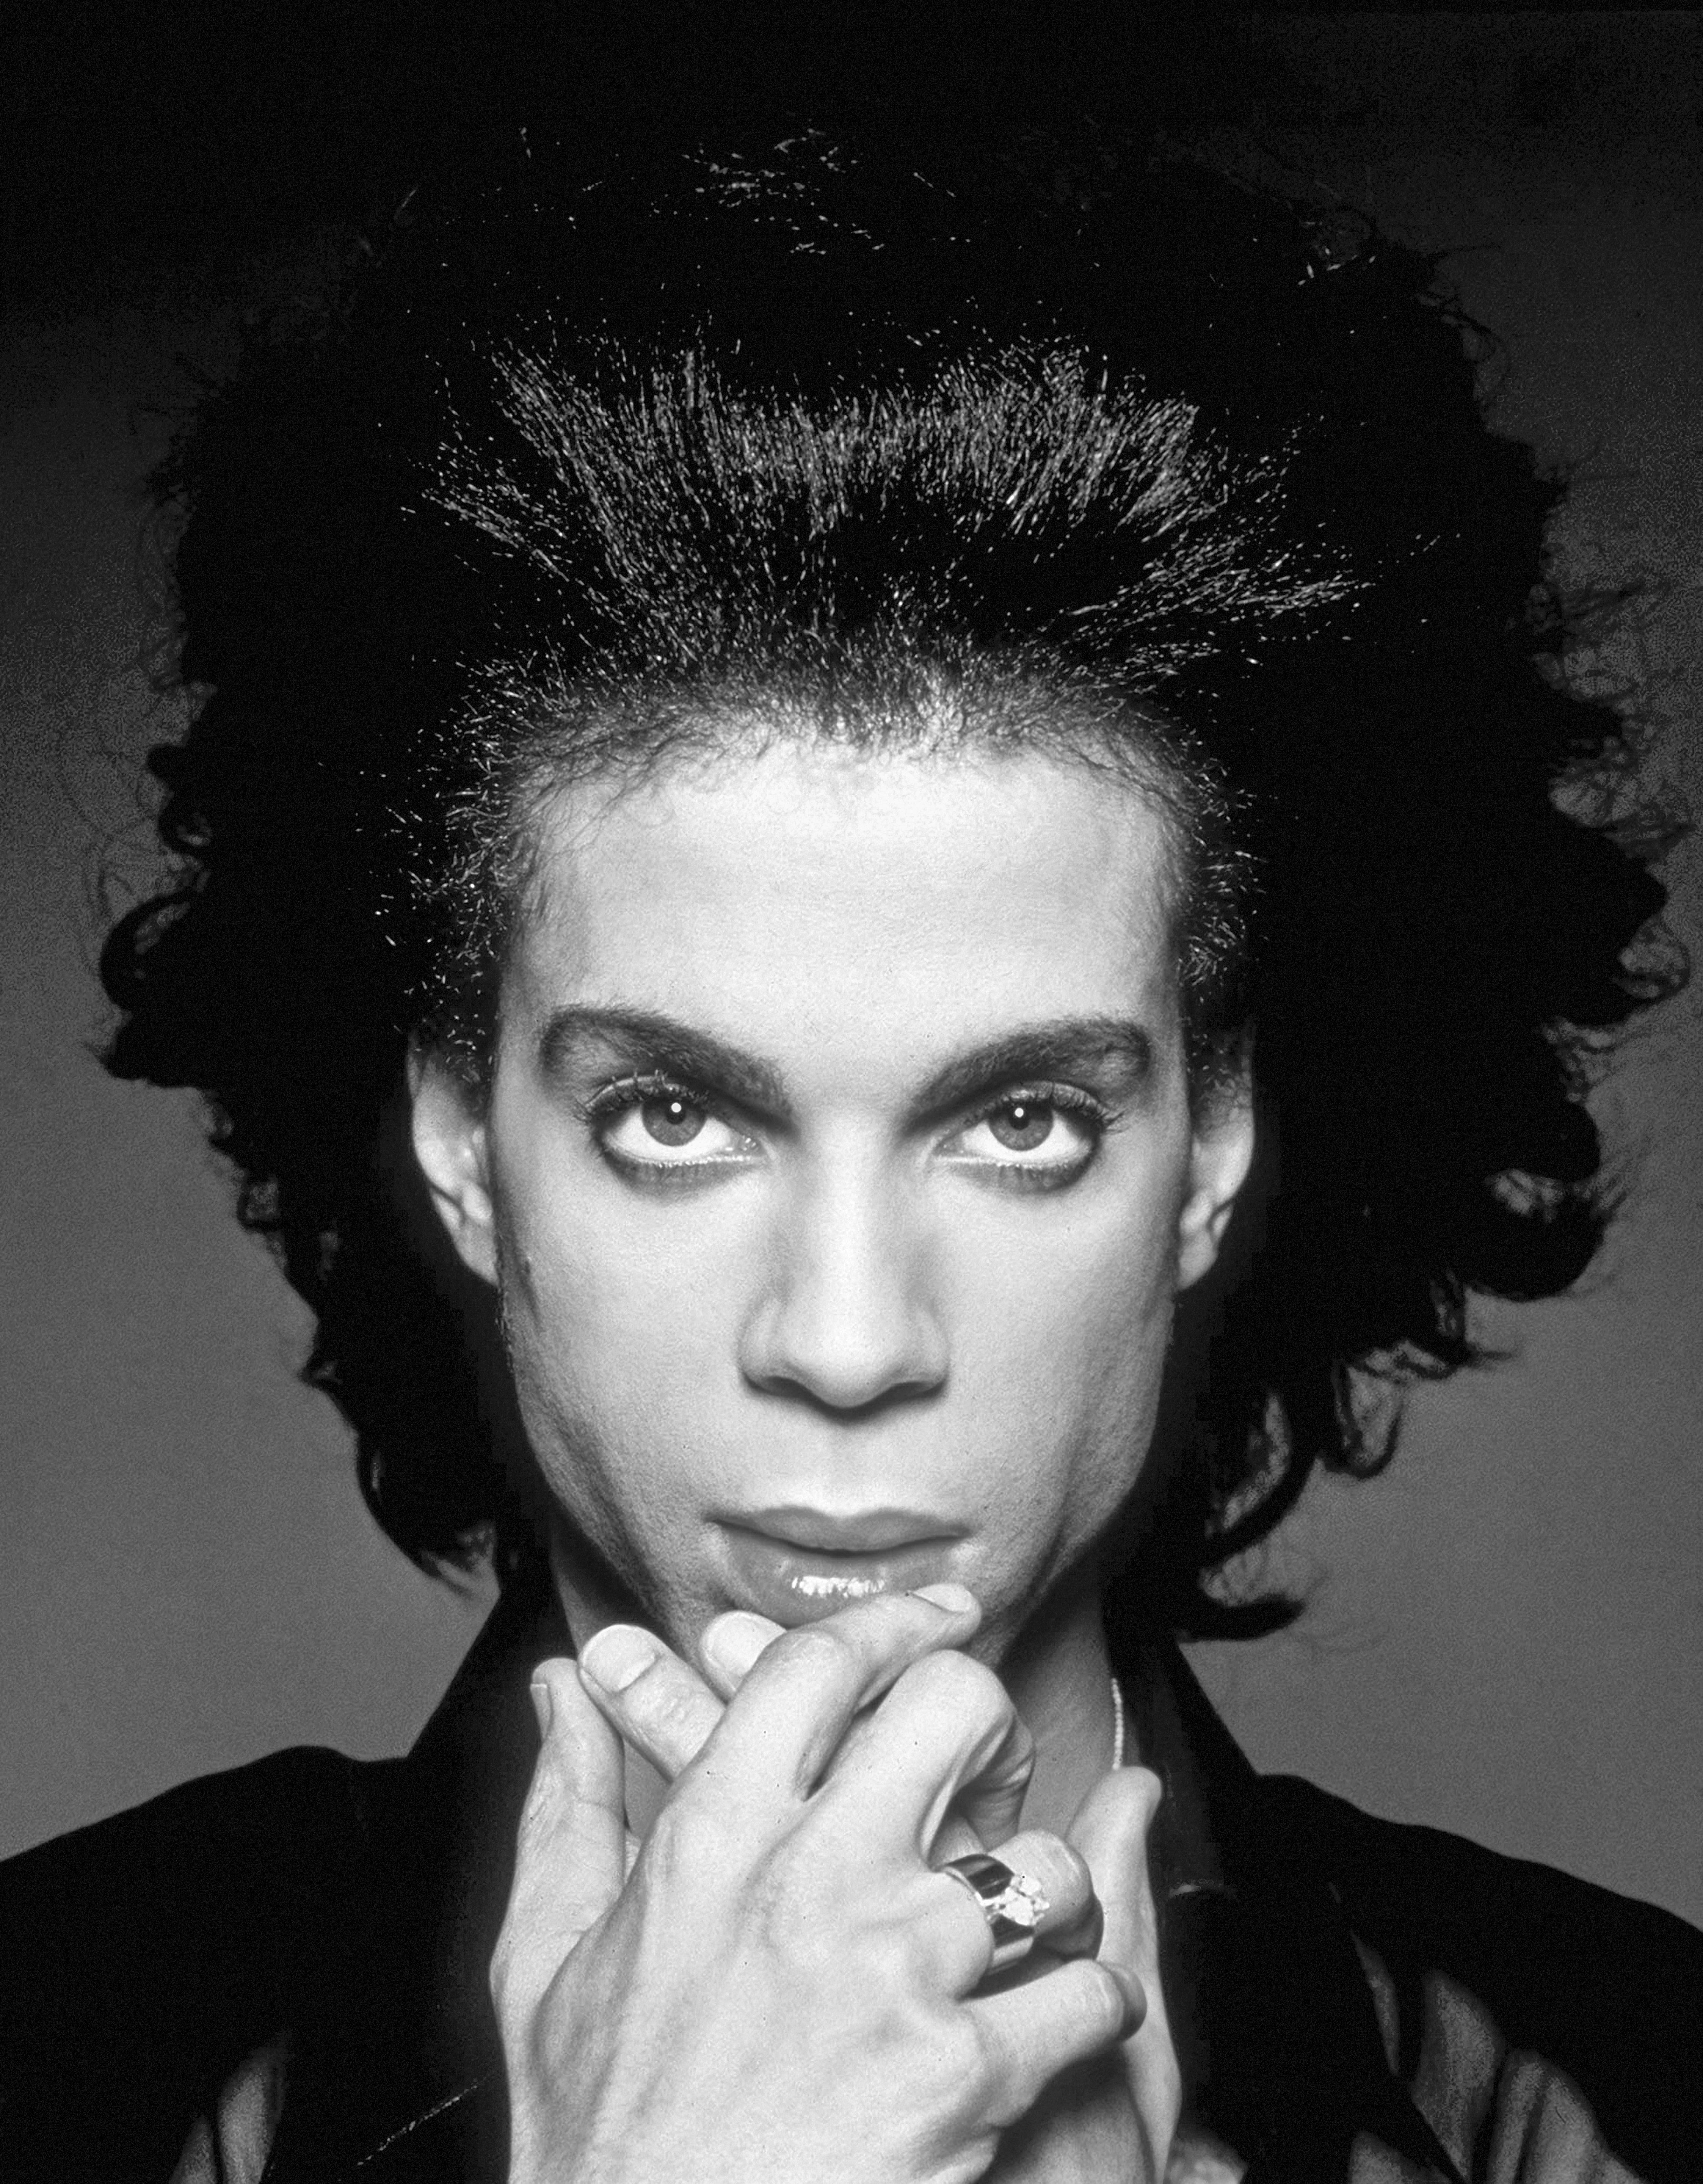 Unknown Black and White Photograph - Prince, The Artist Fine Art Print